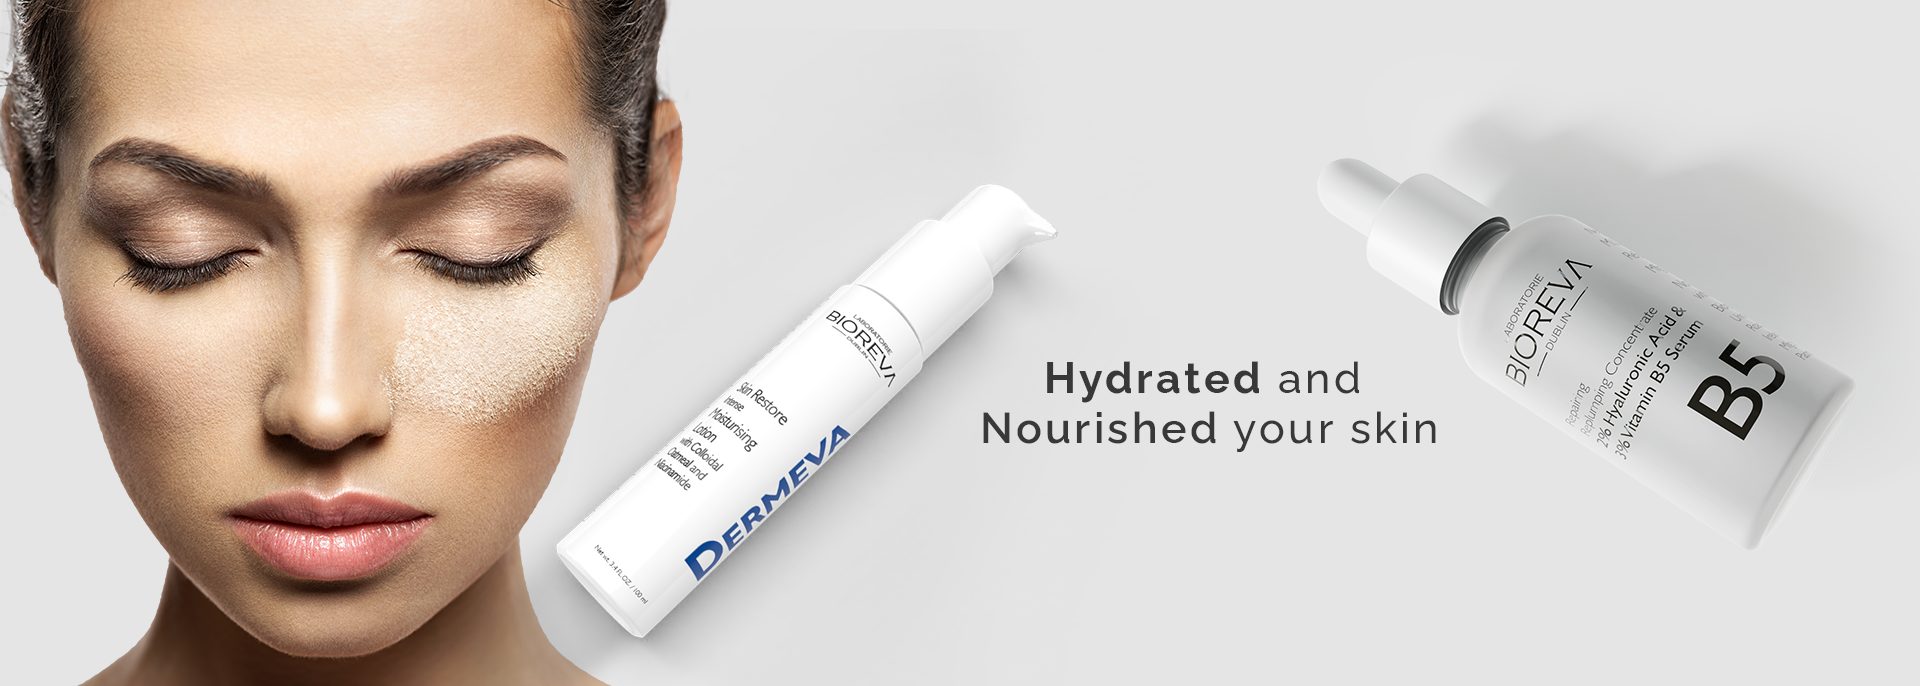 Hydrated & Nourished your Skin